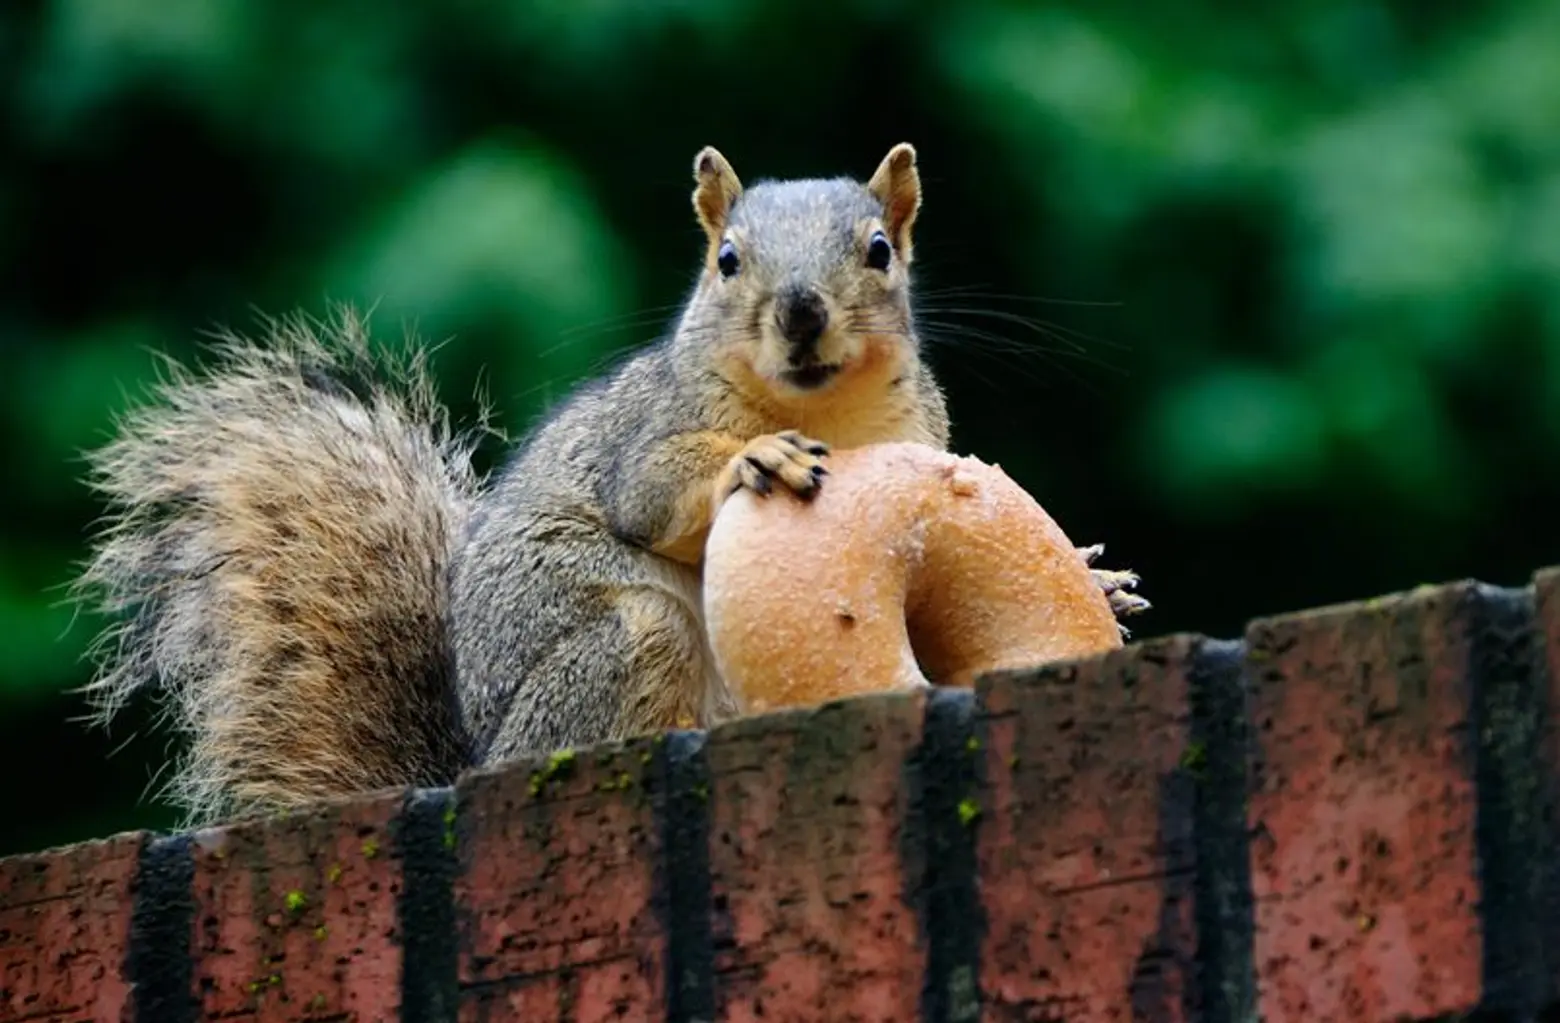 Central Park squirrels: Once exotic, now basically in charge